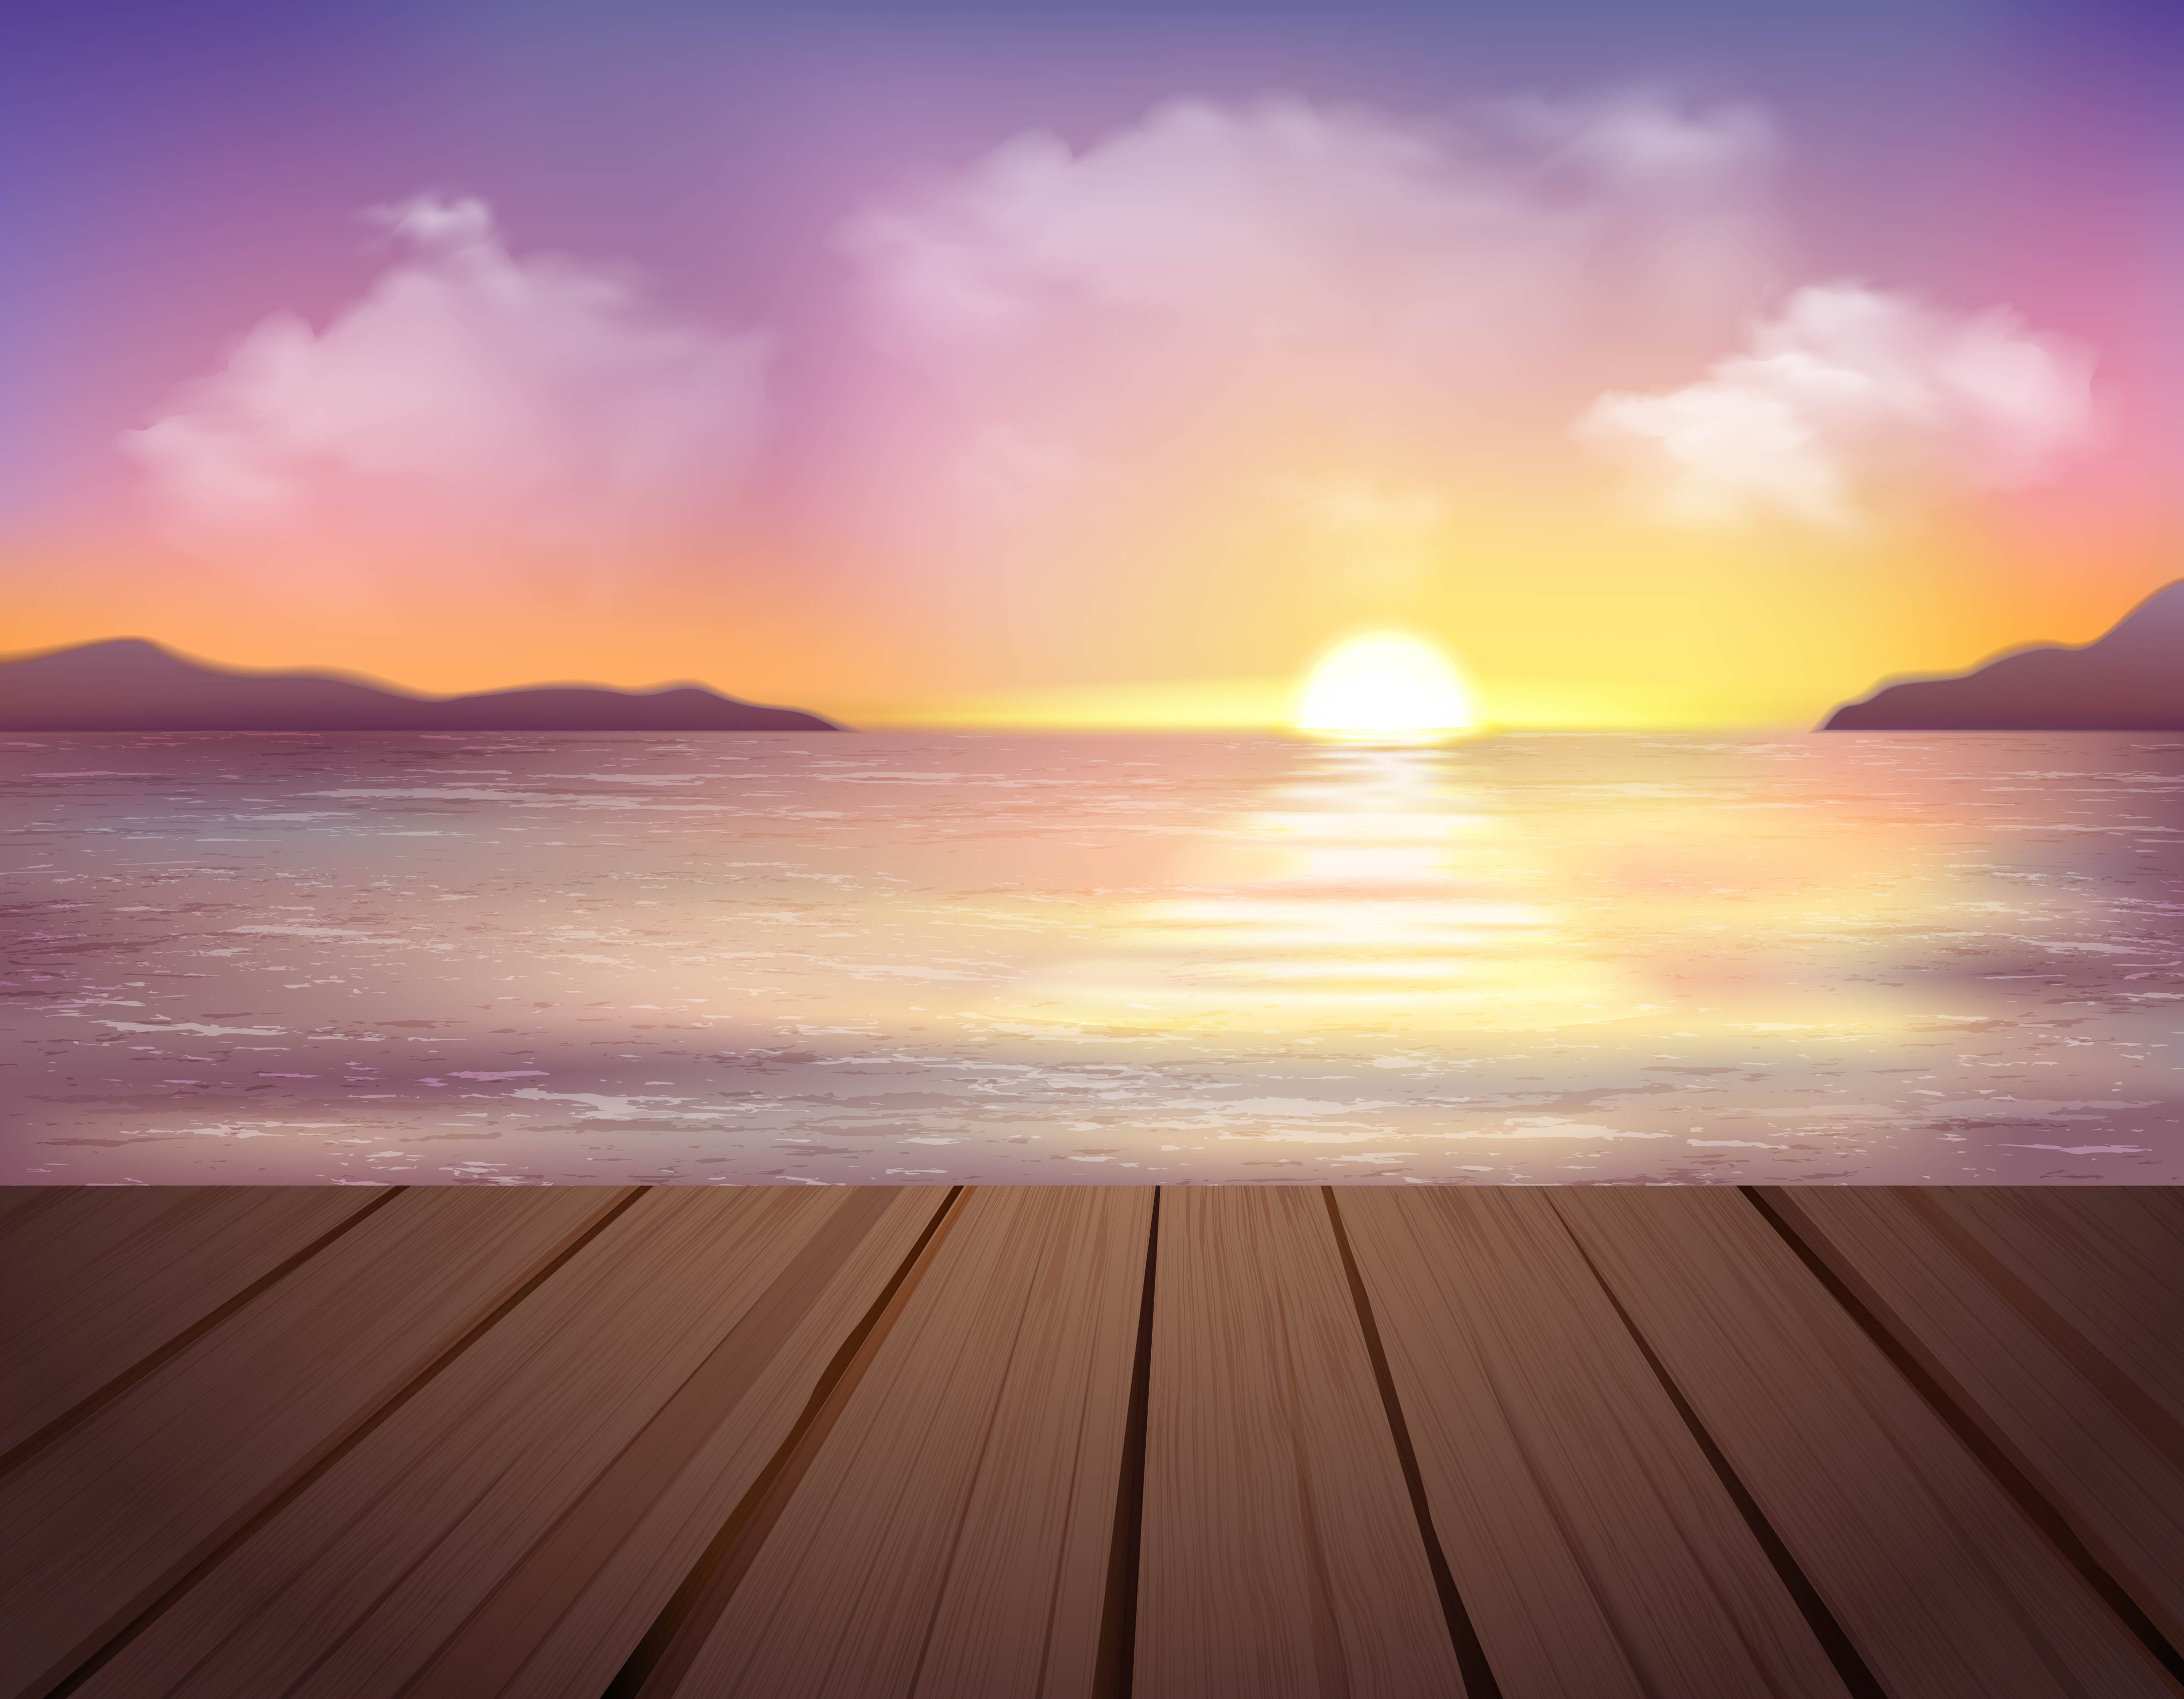 Sunset And Sea Background Download Free Vectors Clipart